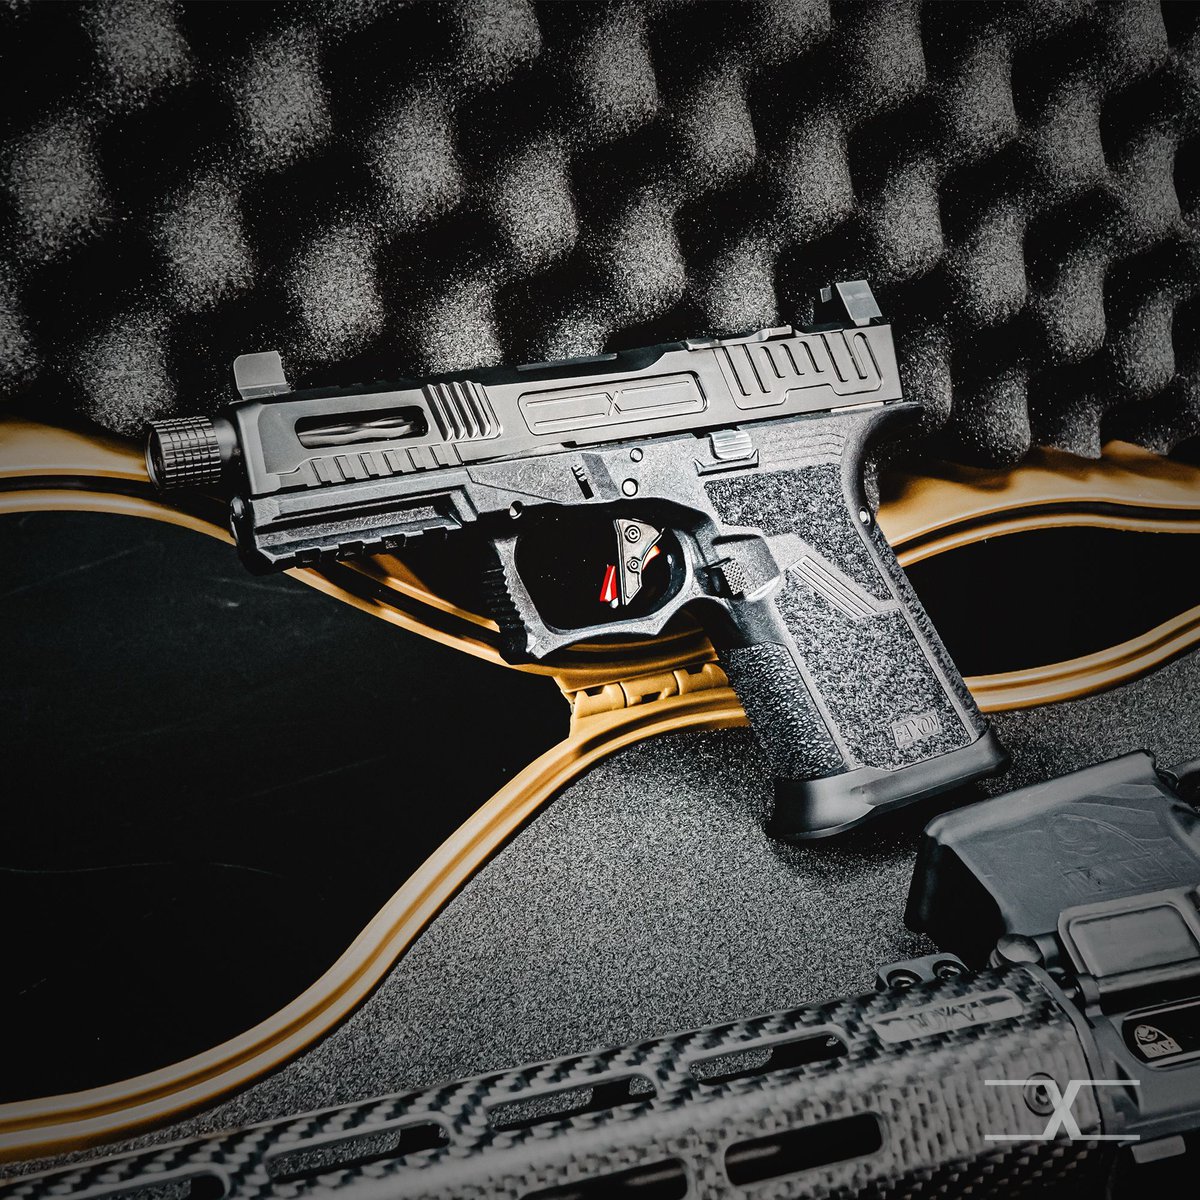 🎯 The FX-19 Hellfire is excellent alongside your Faxon rifle. 
bit.ly/4cL2rQv 
.
.
.
.
.
#Faxon #Firearms #FaxonFirearms #Machining #Manufacturing #MadeInUSA #FamilyOwned #Outdoors #Engineering #GunsDaily #SickGuns #Mountains #FX19 #pistol